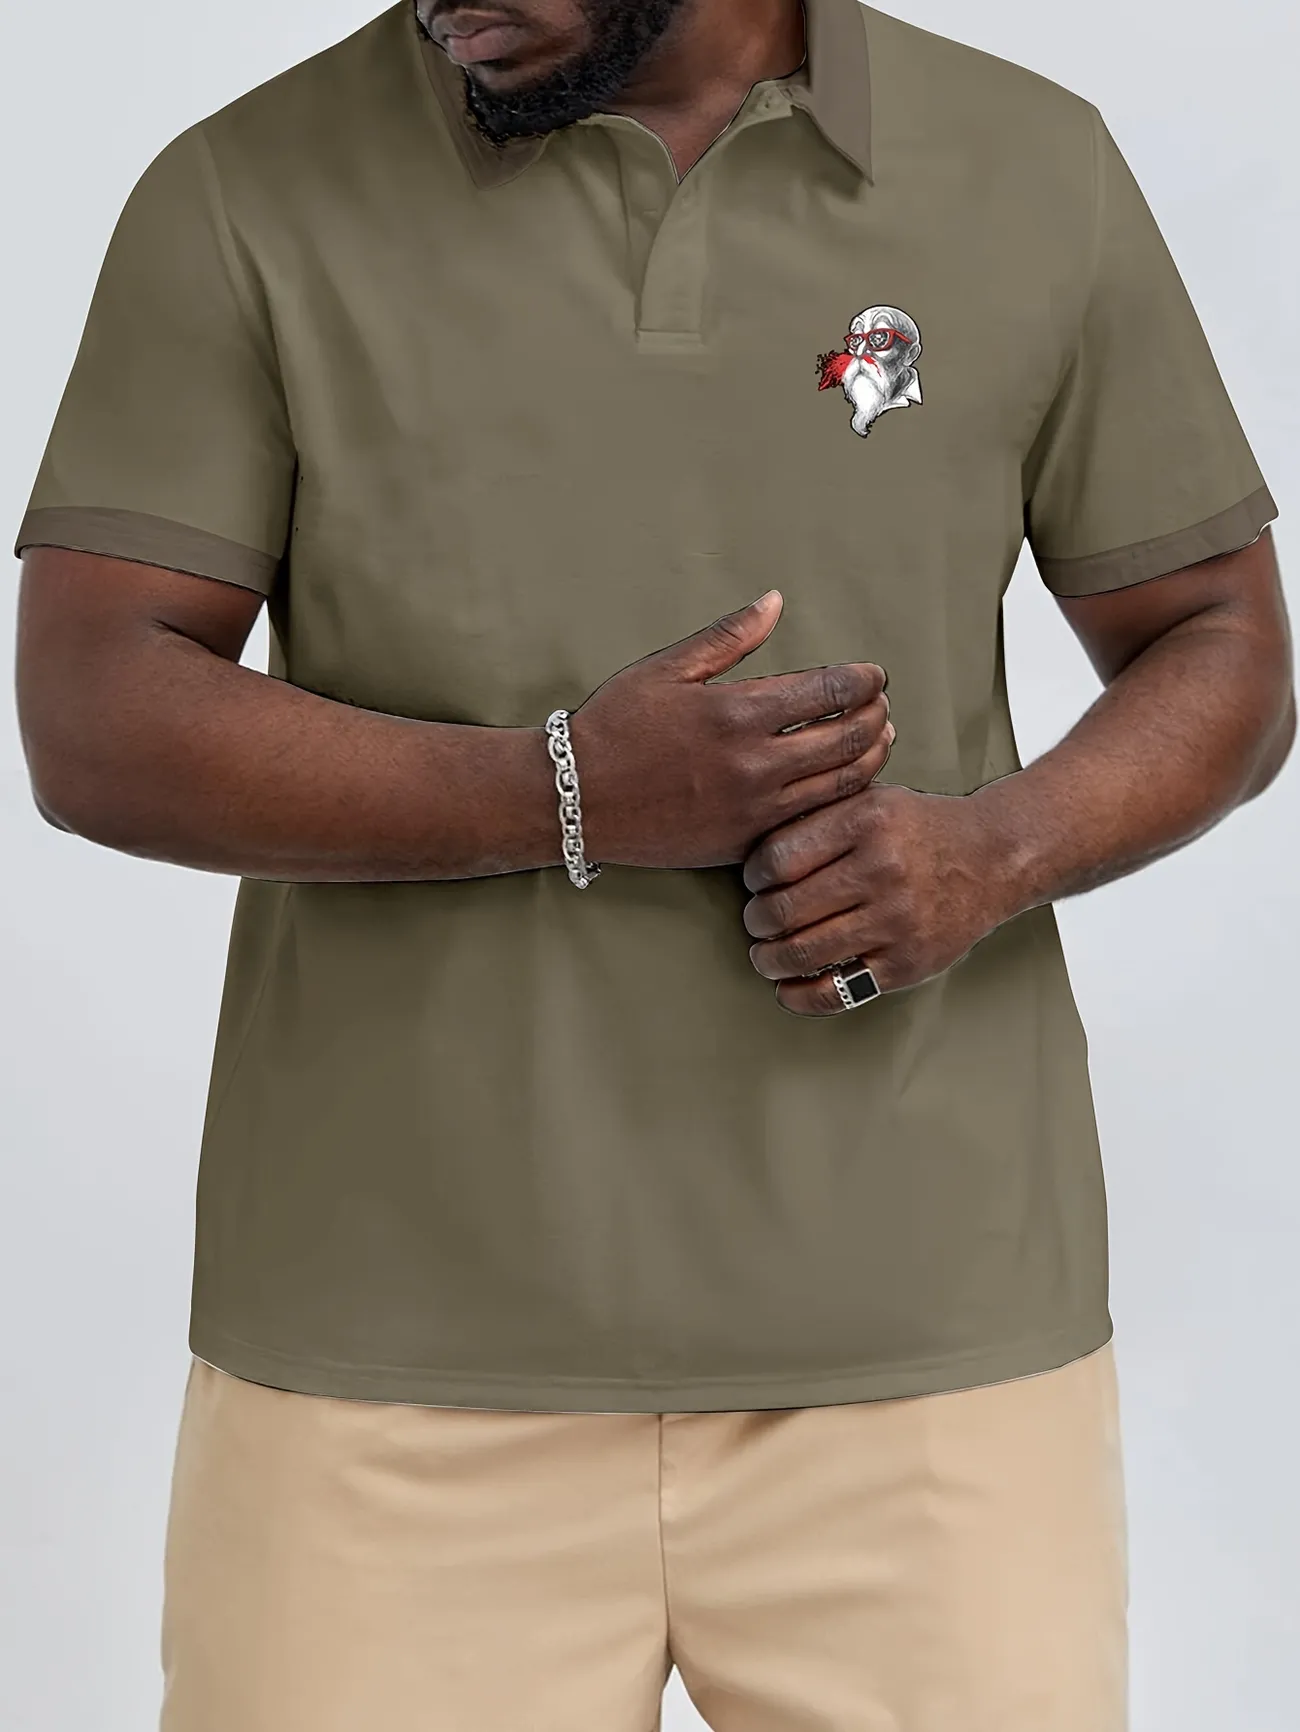 old style golf clothes